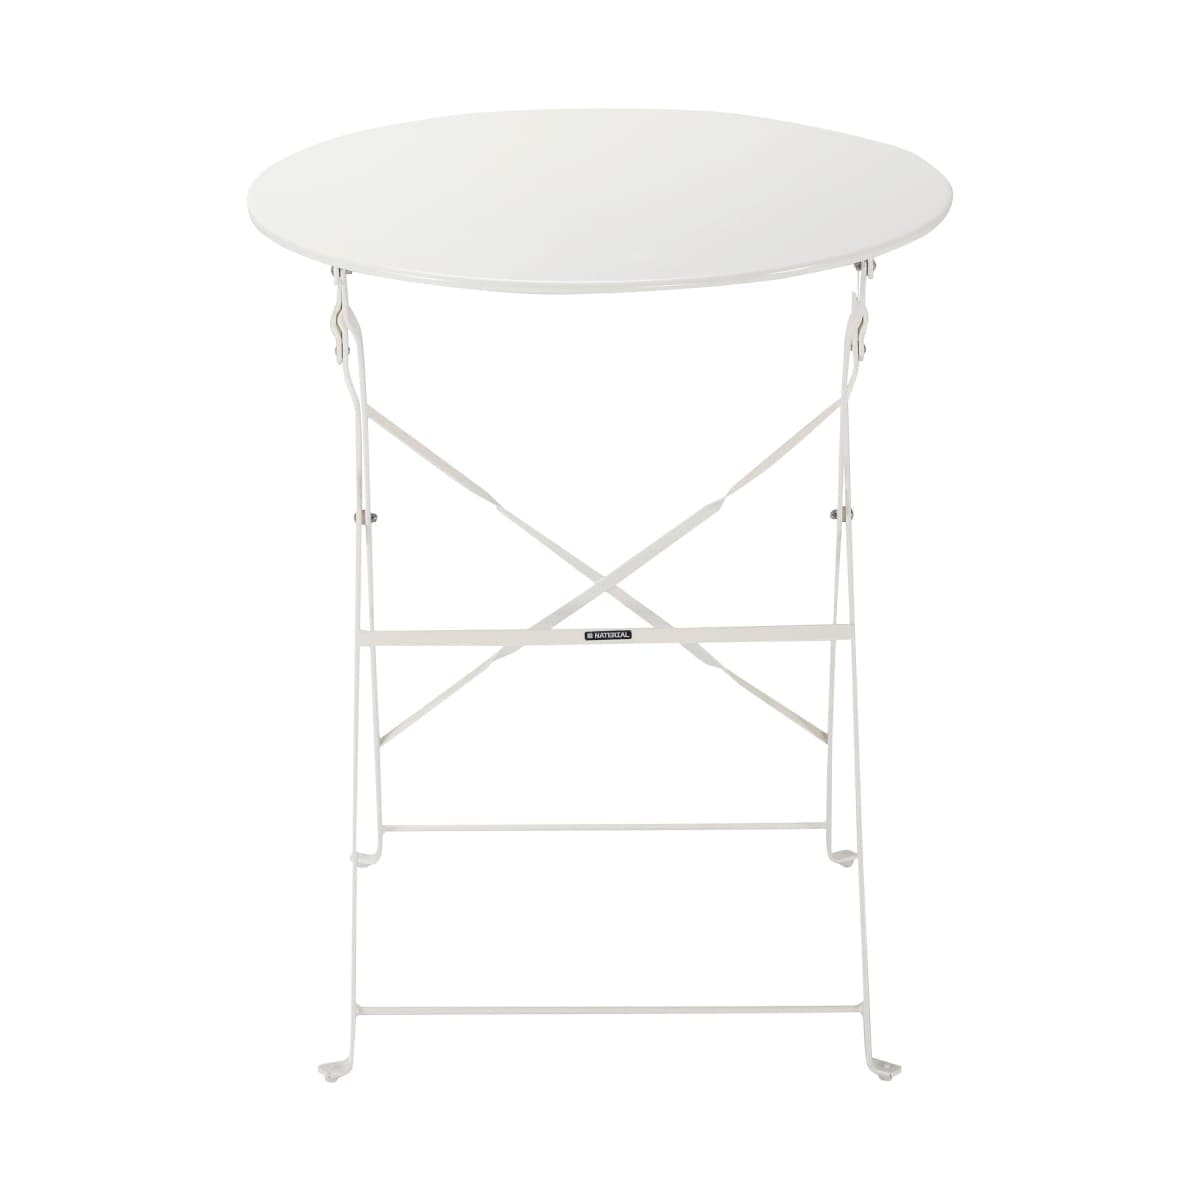 FLORA NATERIAL FOLDING TABLE 2 PLACES ROUND STEEL D 60XH71 - best price from Maltashopper.com BR500009666